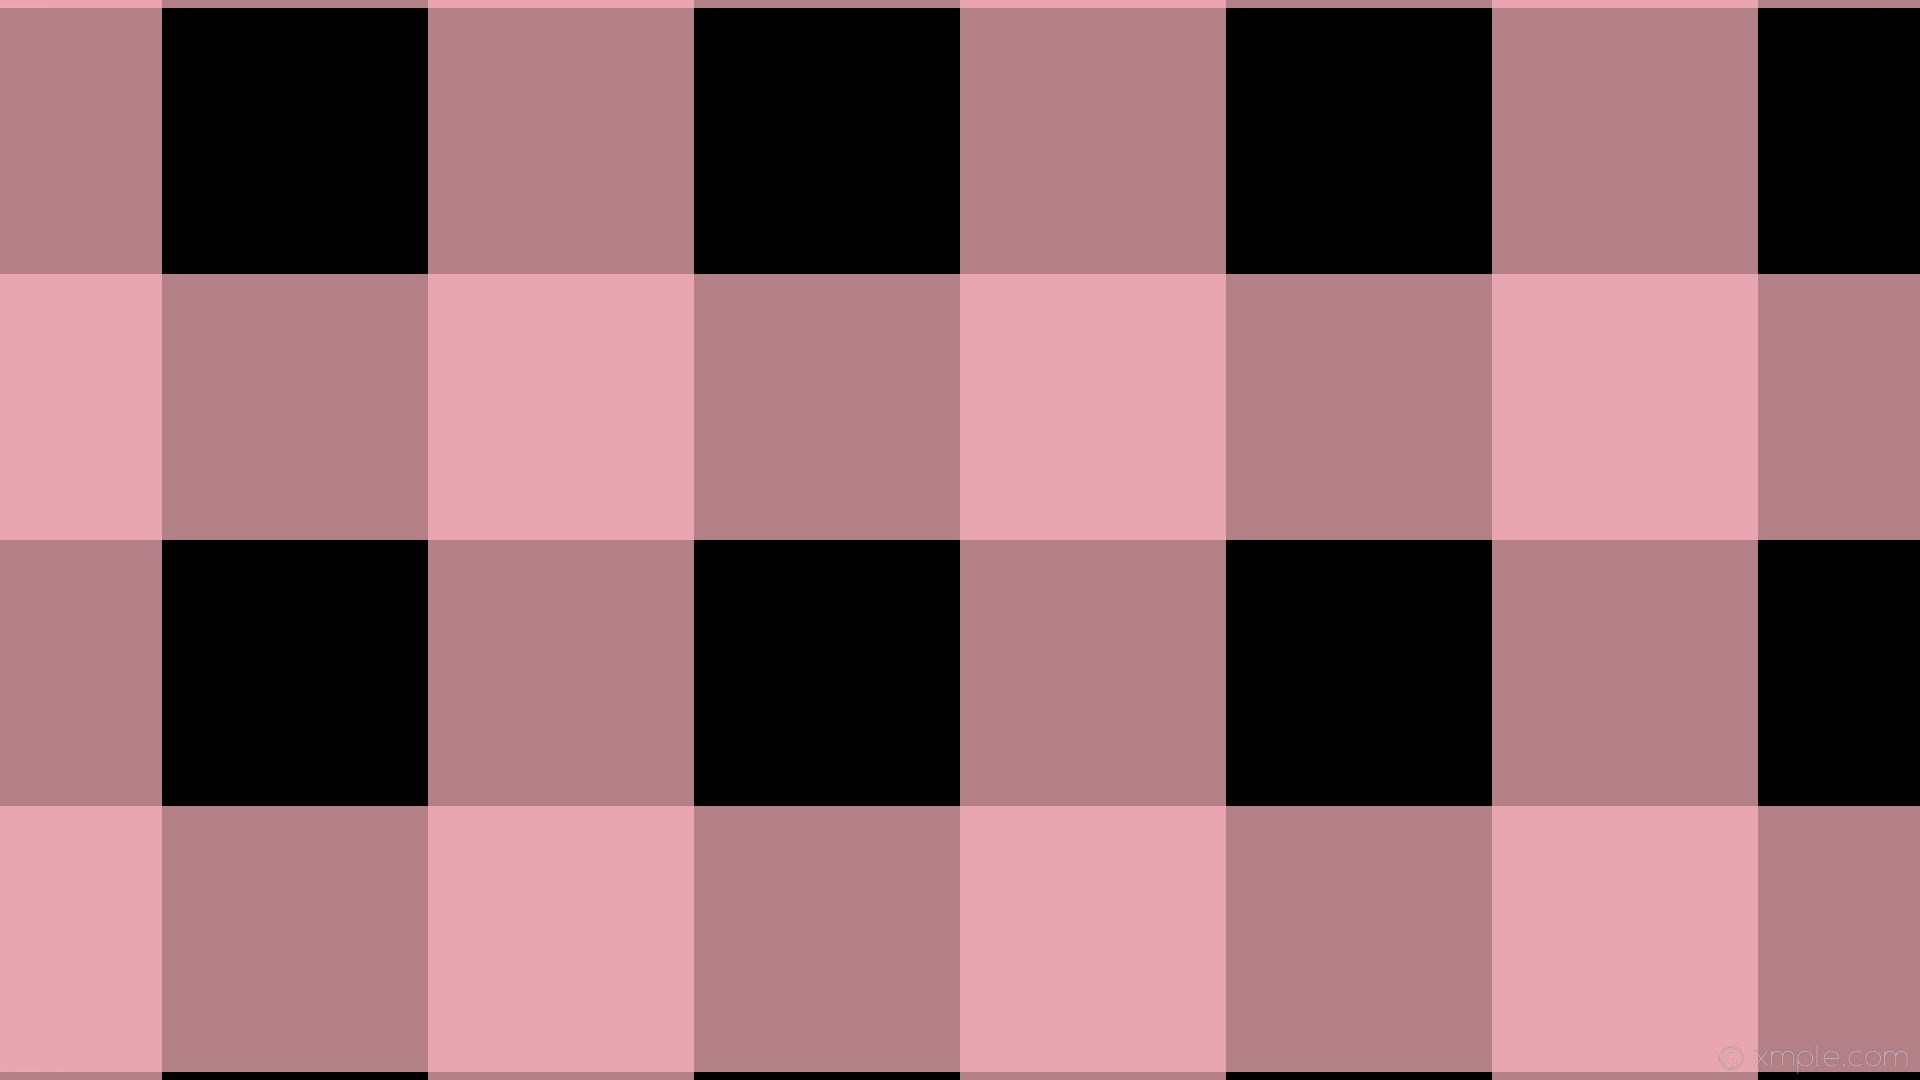 Light Pink And Black Wallpapers